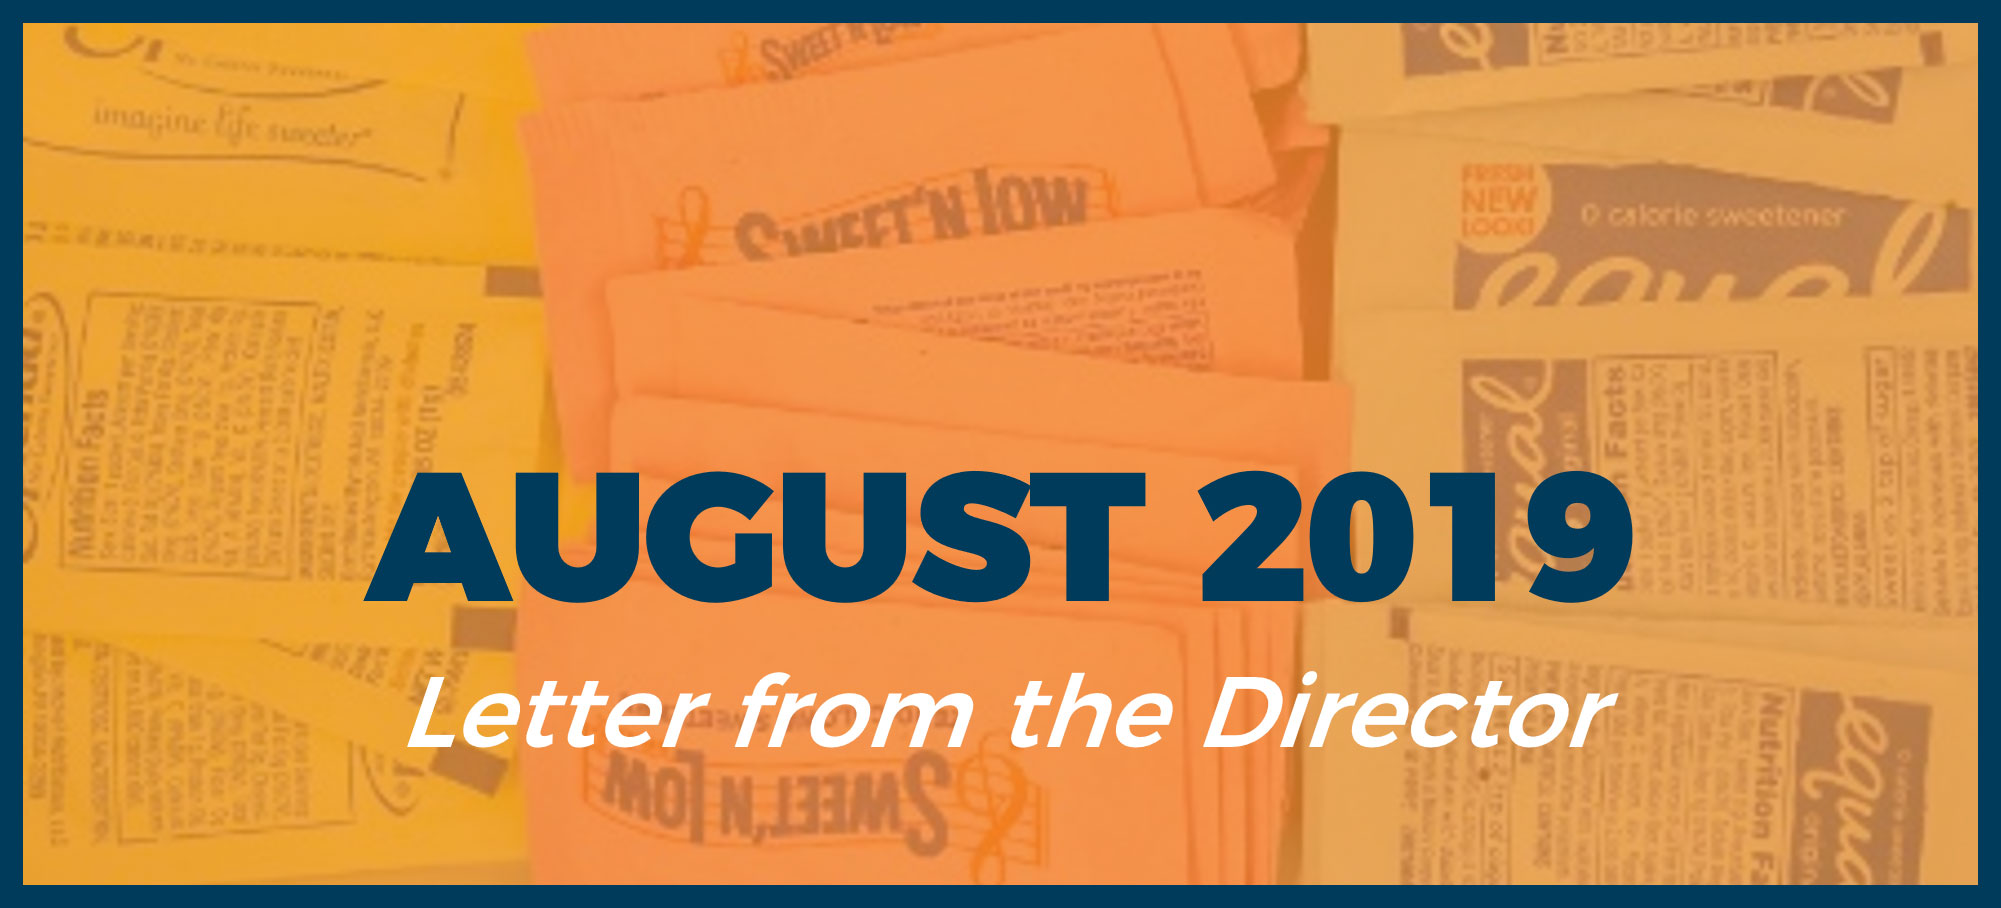 August 2019 - Letter from the Director